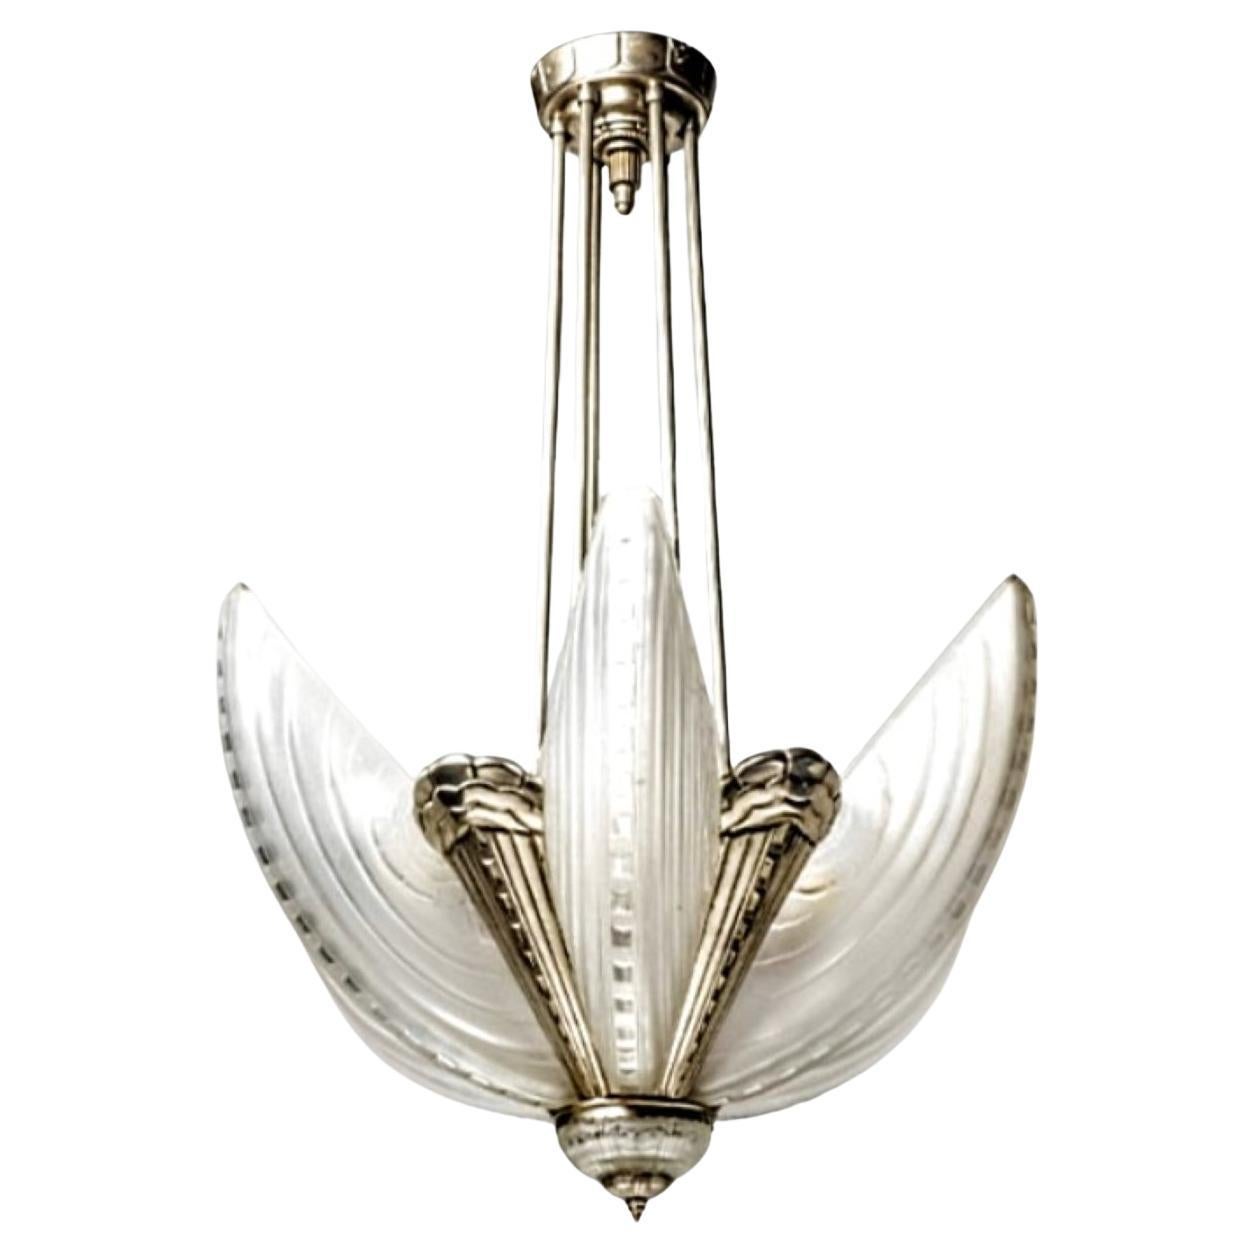 An exquisite rare French Art Deco chandelier created by the glass master French artist 